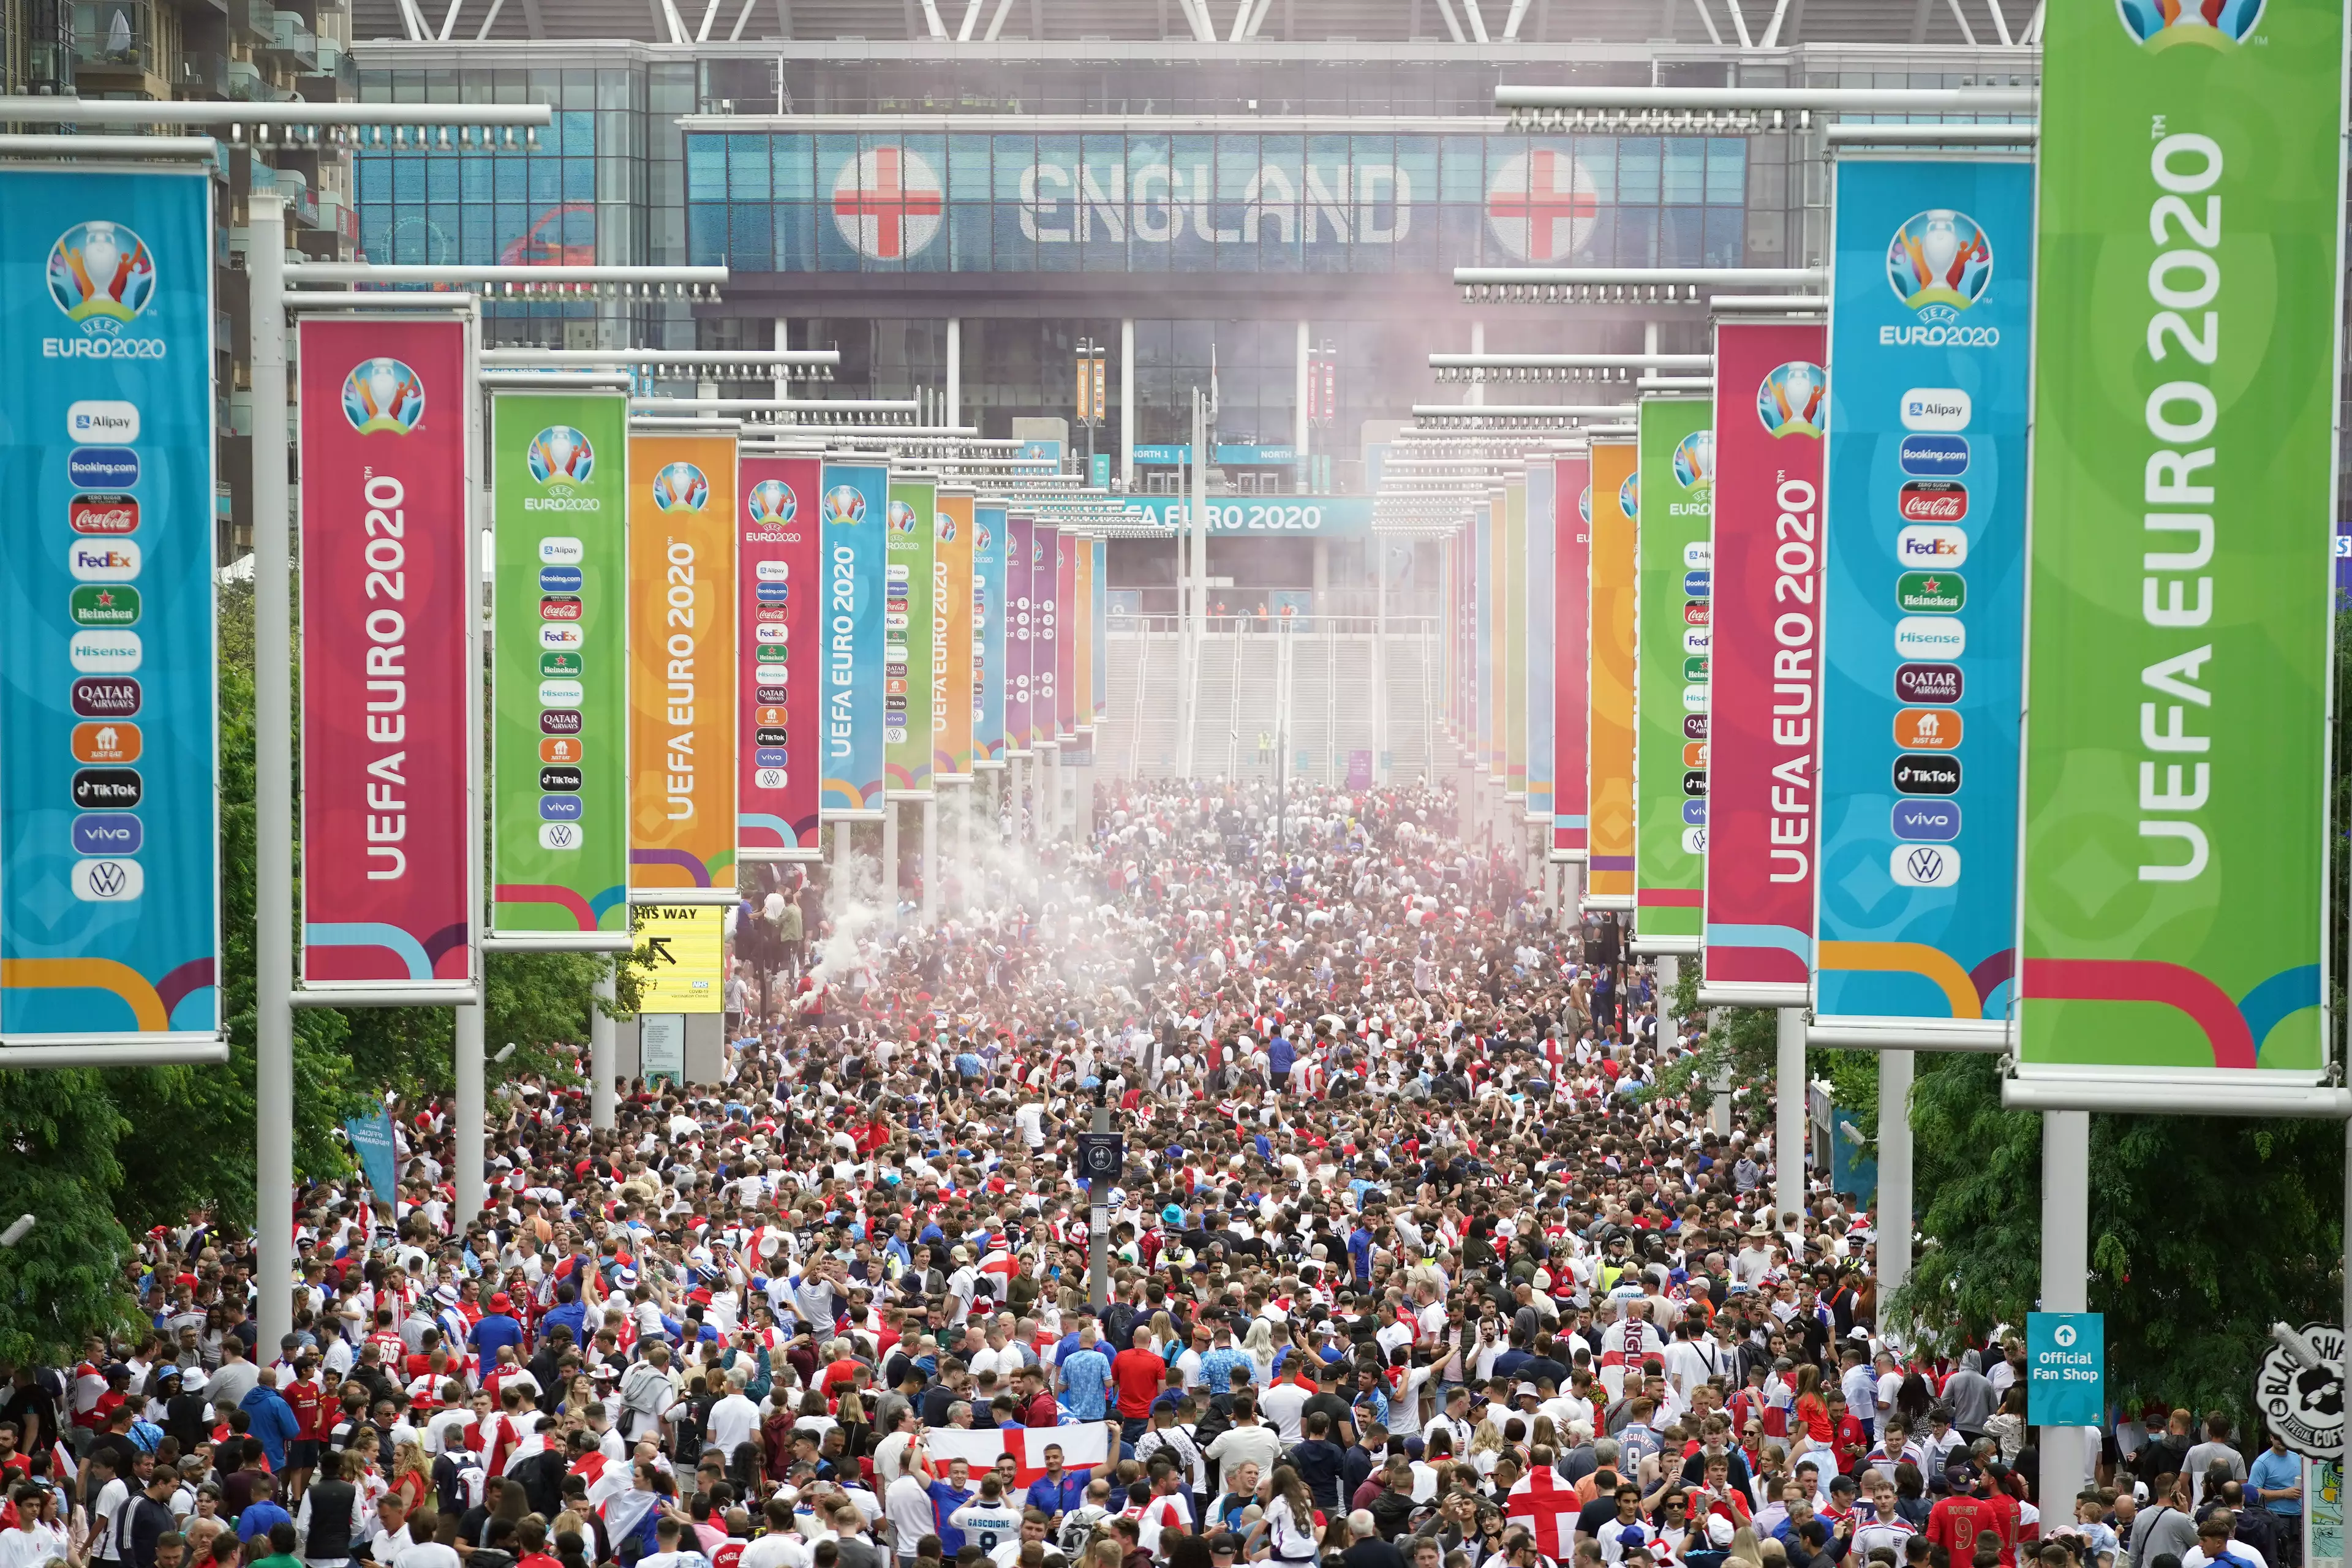 Wembley Way was packed ahead of kick off. Image: PA Images